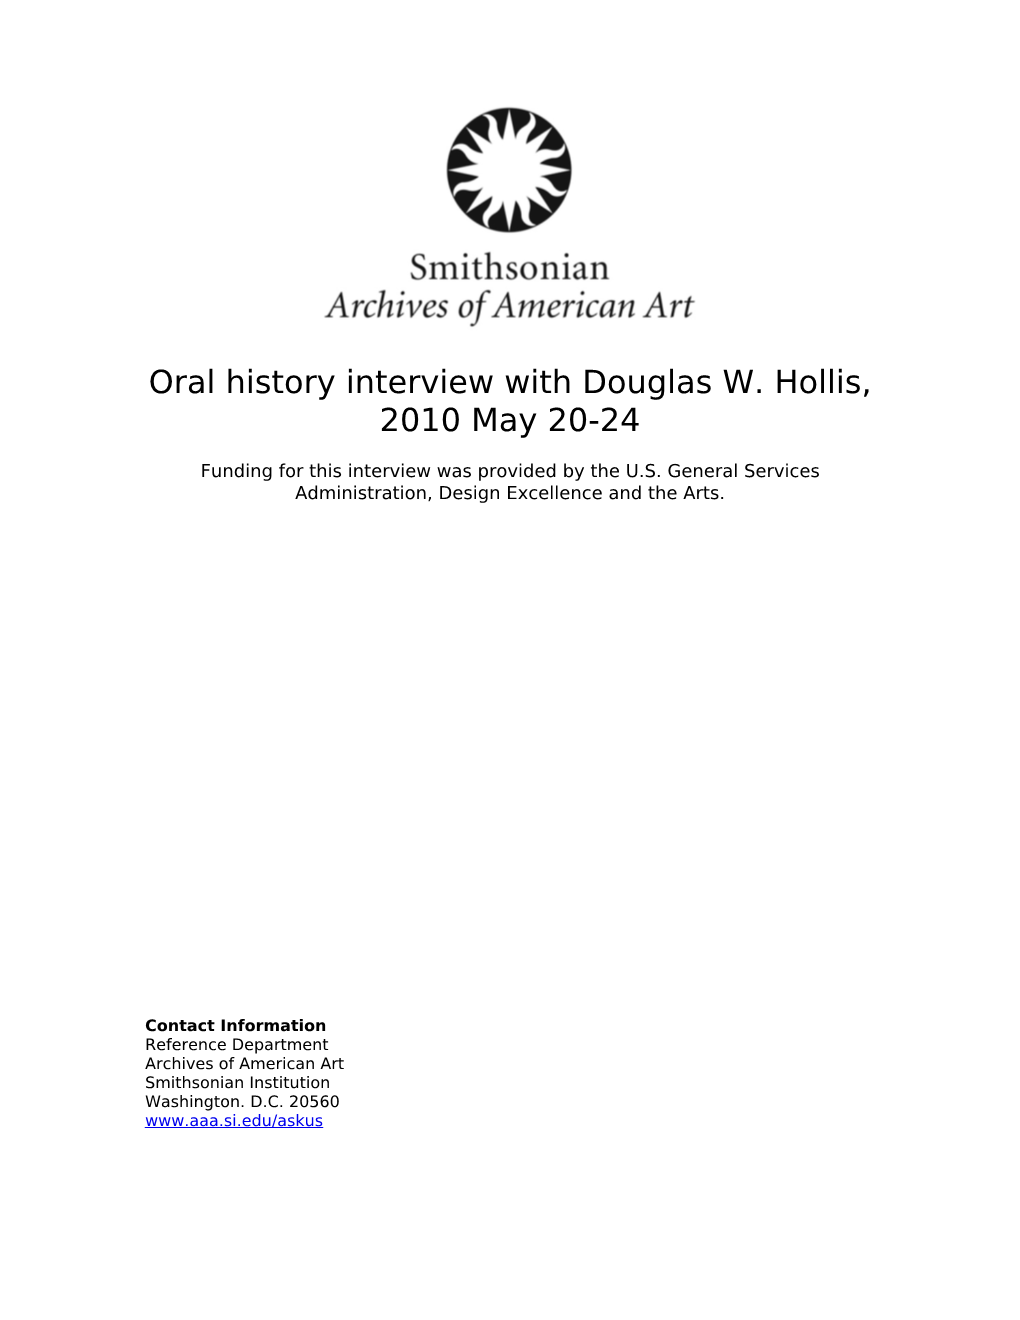 Oral History Interview with Douglas W. Hollis, 2010 May 20-24